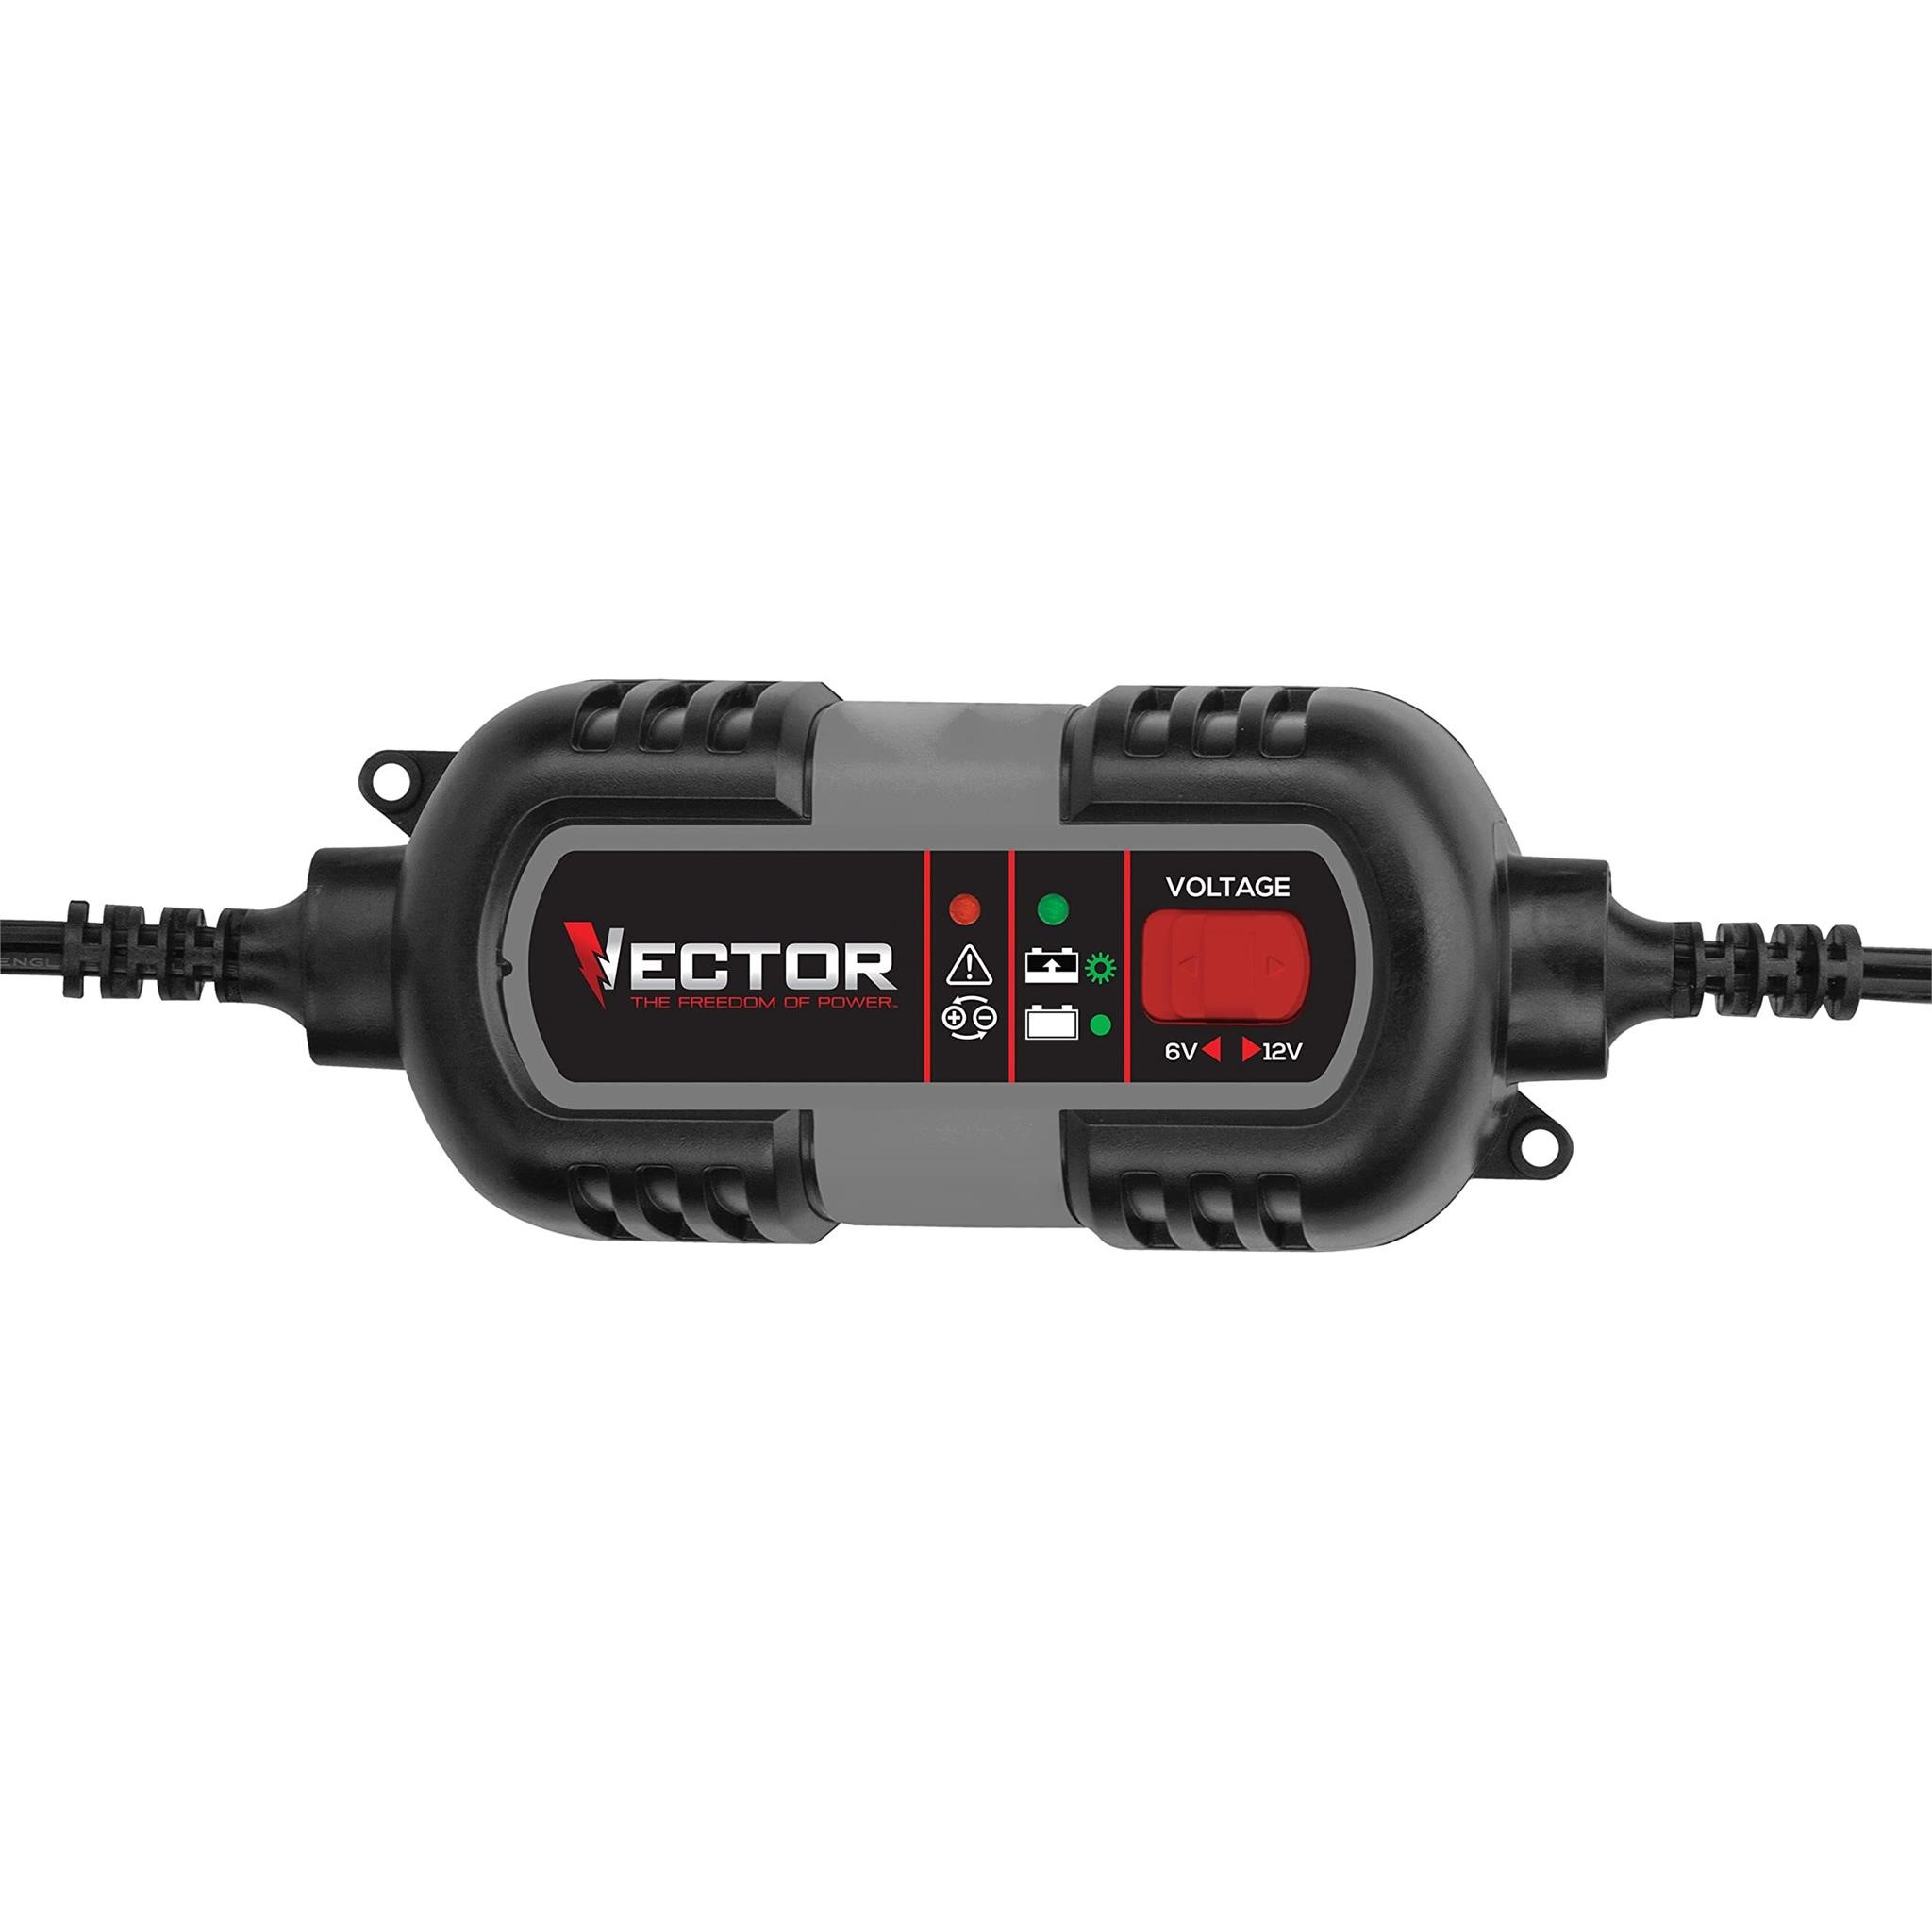 VECTOR 1.5 Amp Battery Charger, Battery Maintainer